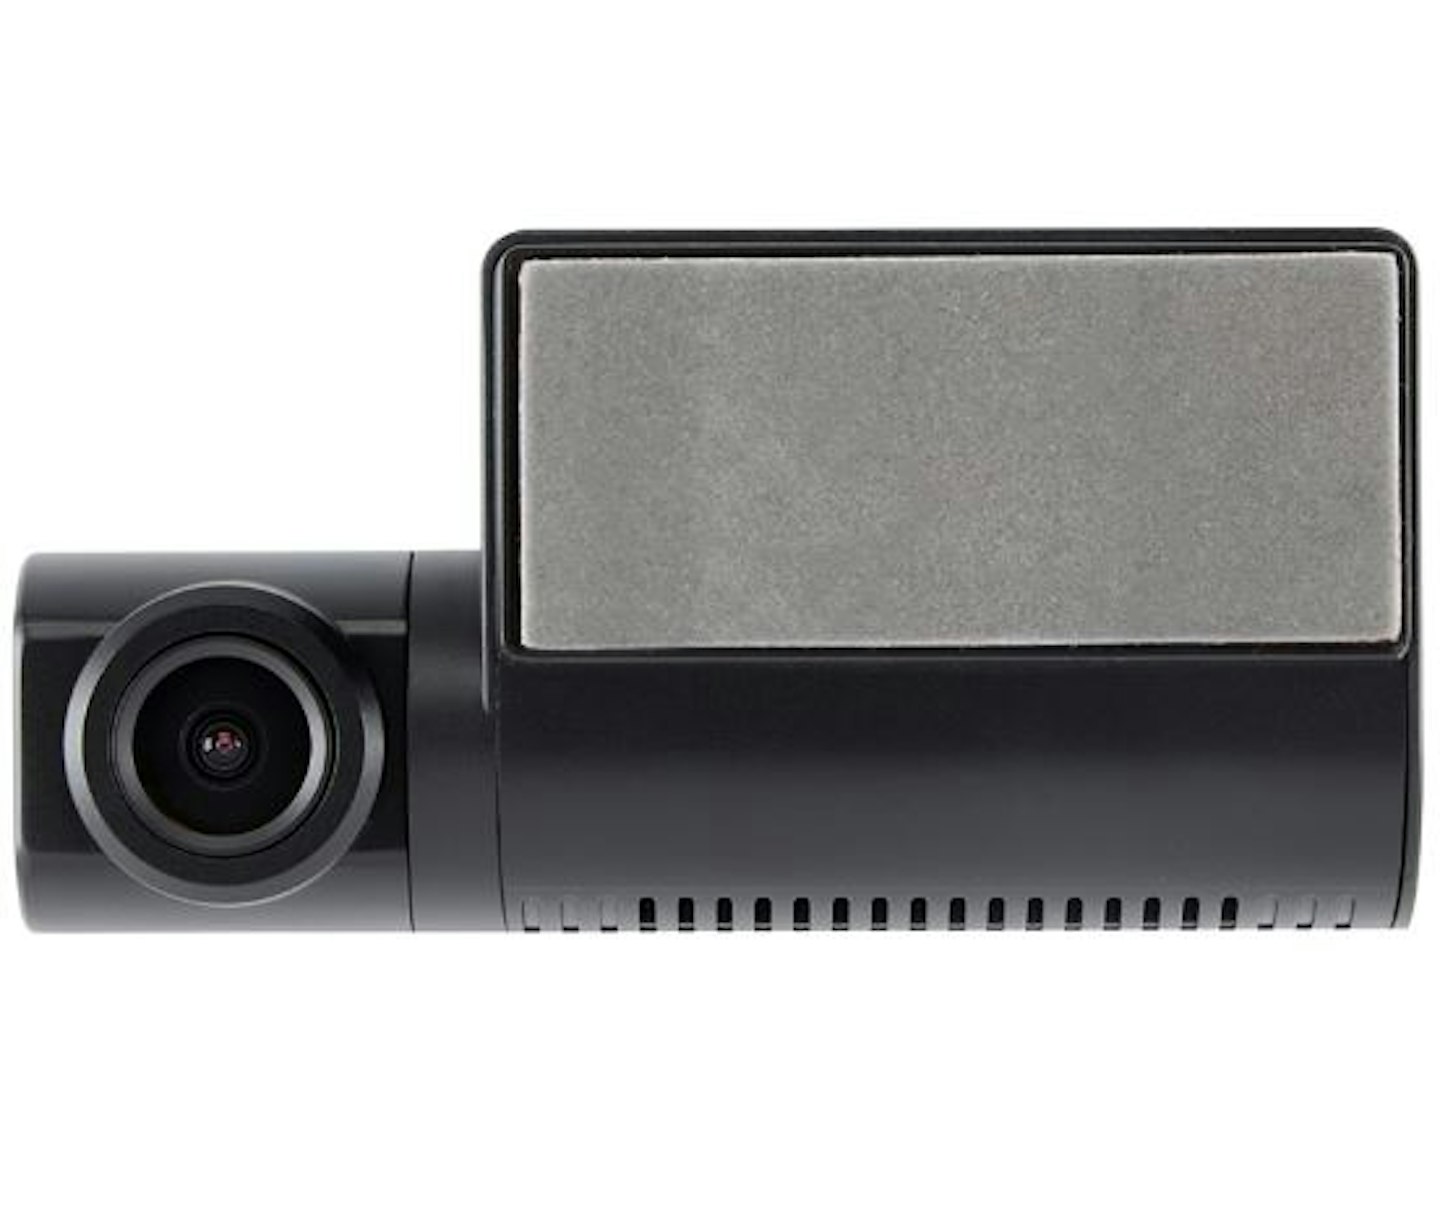 Car camera • Compare (100+ products) find best prices »